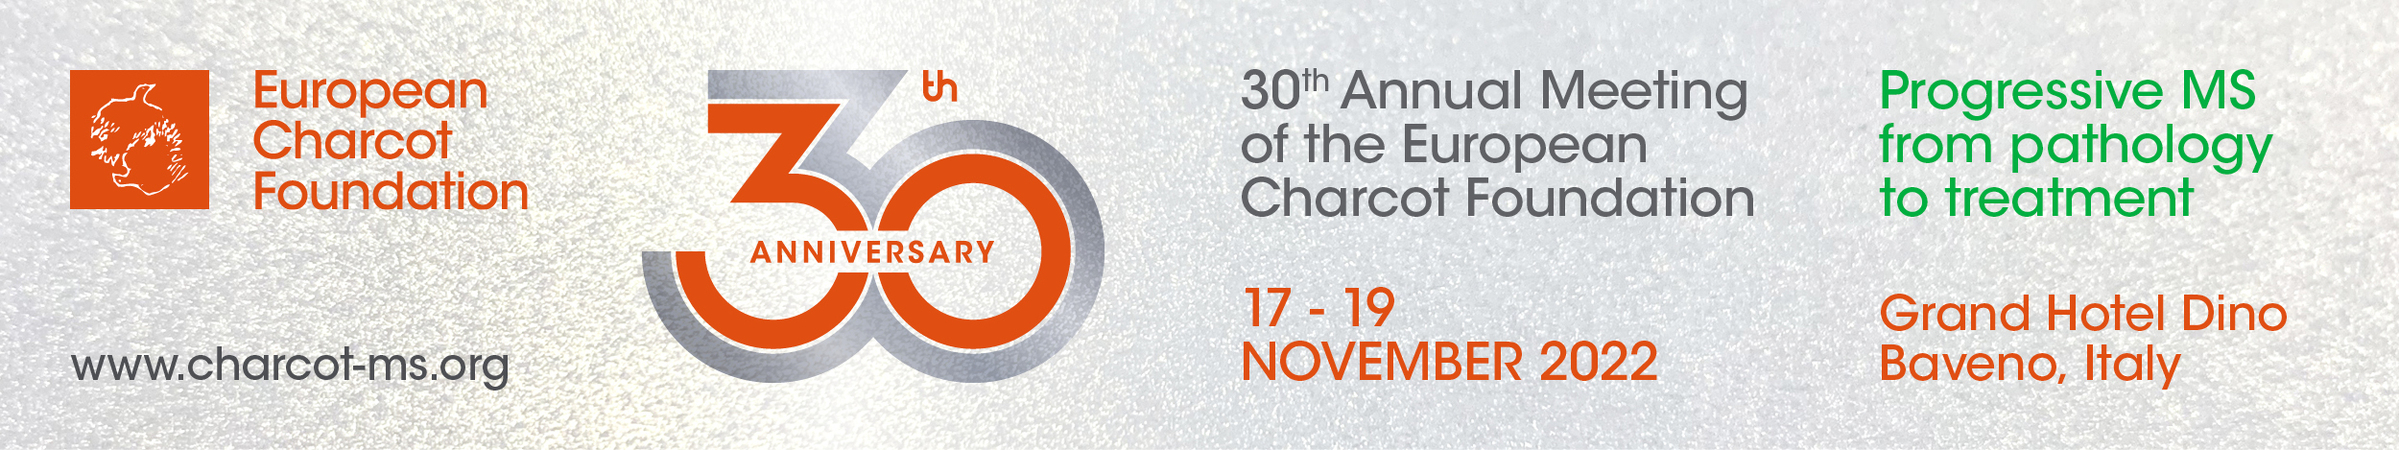 Hotel reservation - 30th Annual Meeting of the European Charcot Foundation, 17 - 19 November 2022, Baveno 